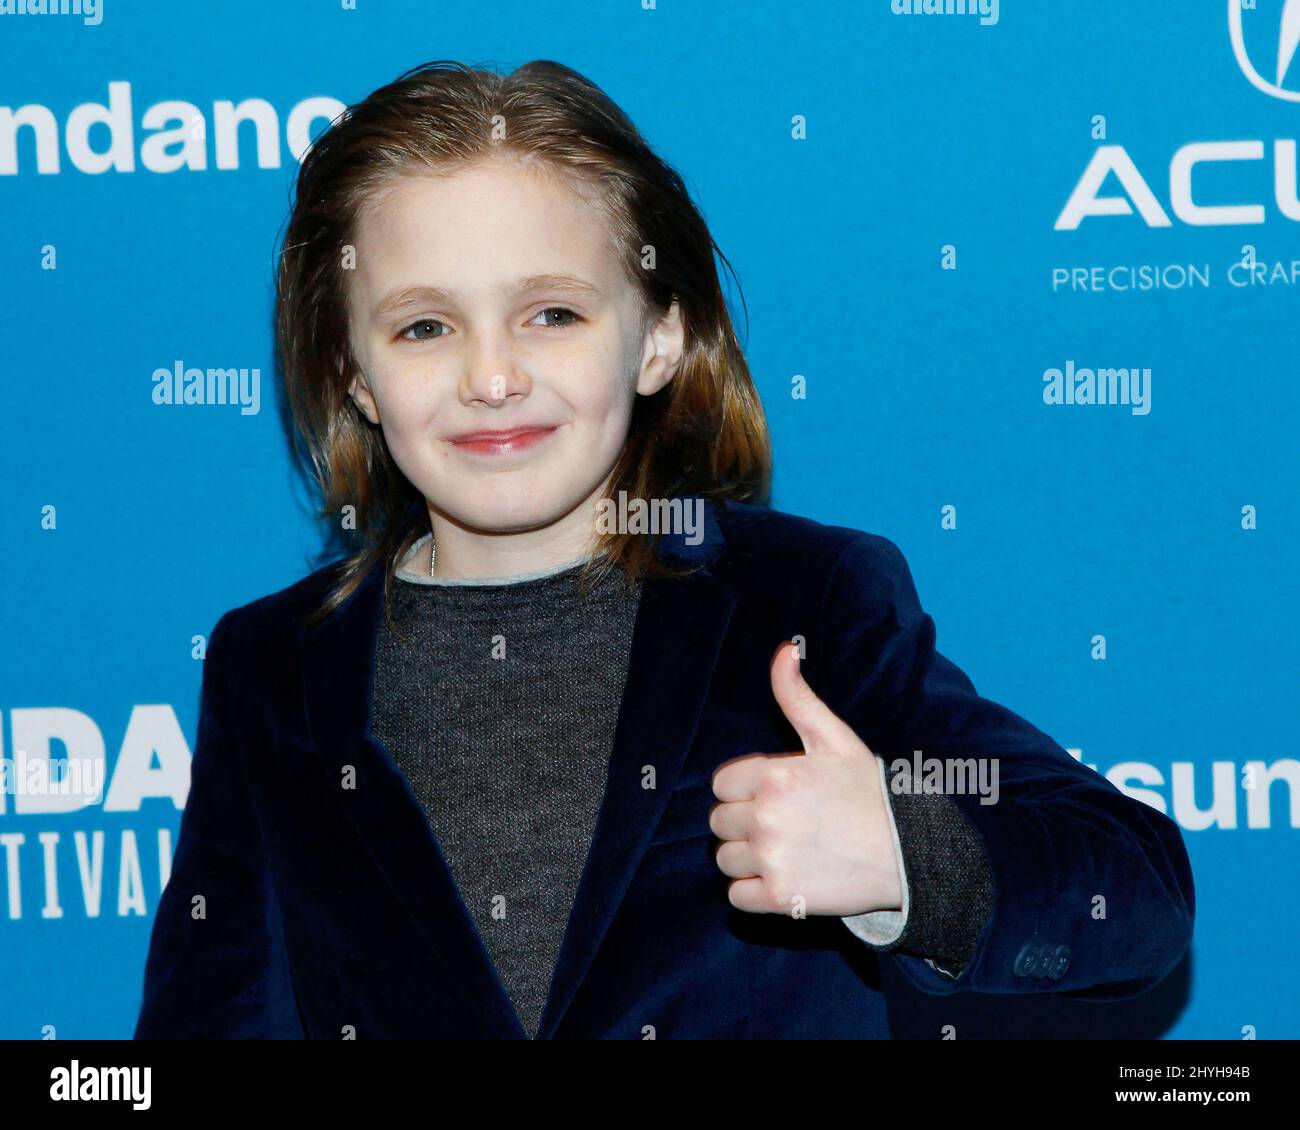 Tre Ryder at the premiere of 'After The Wedding' during the 2019 Sundance Film Festival held at the Eccles Theatre on January 24, 2019 in Park City, UT. Stock Photo